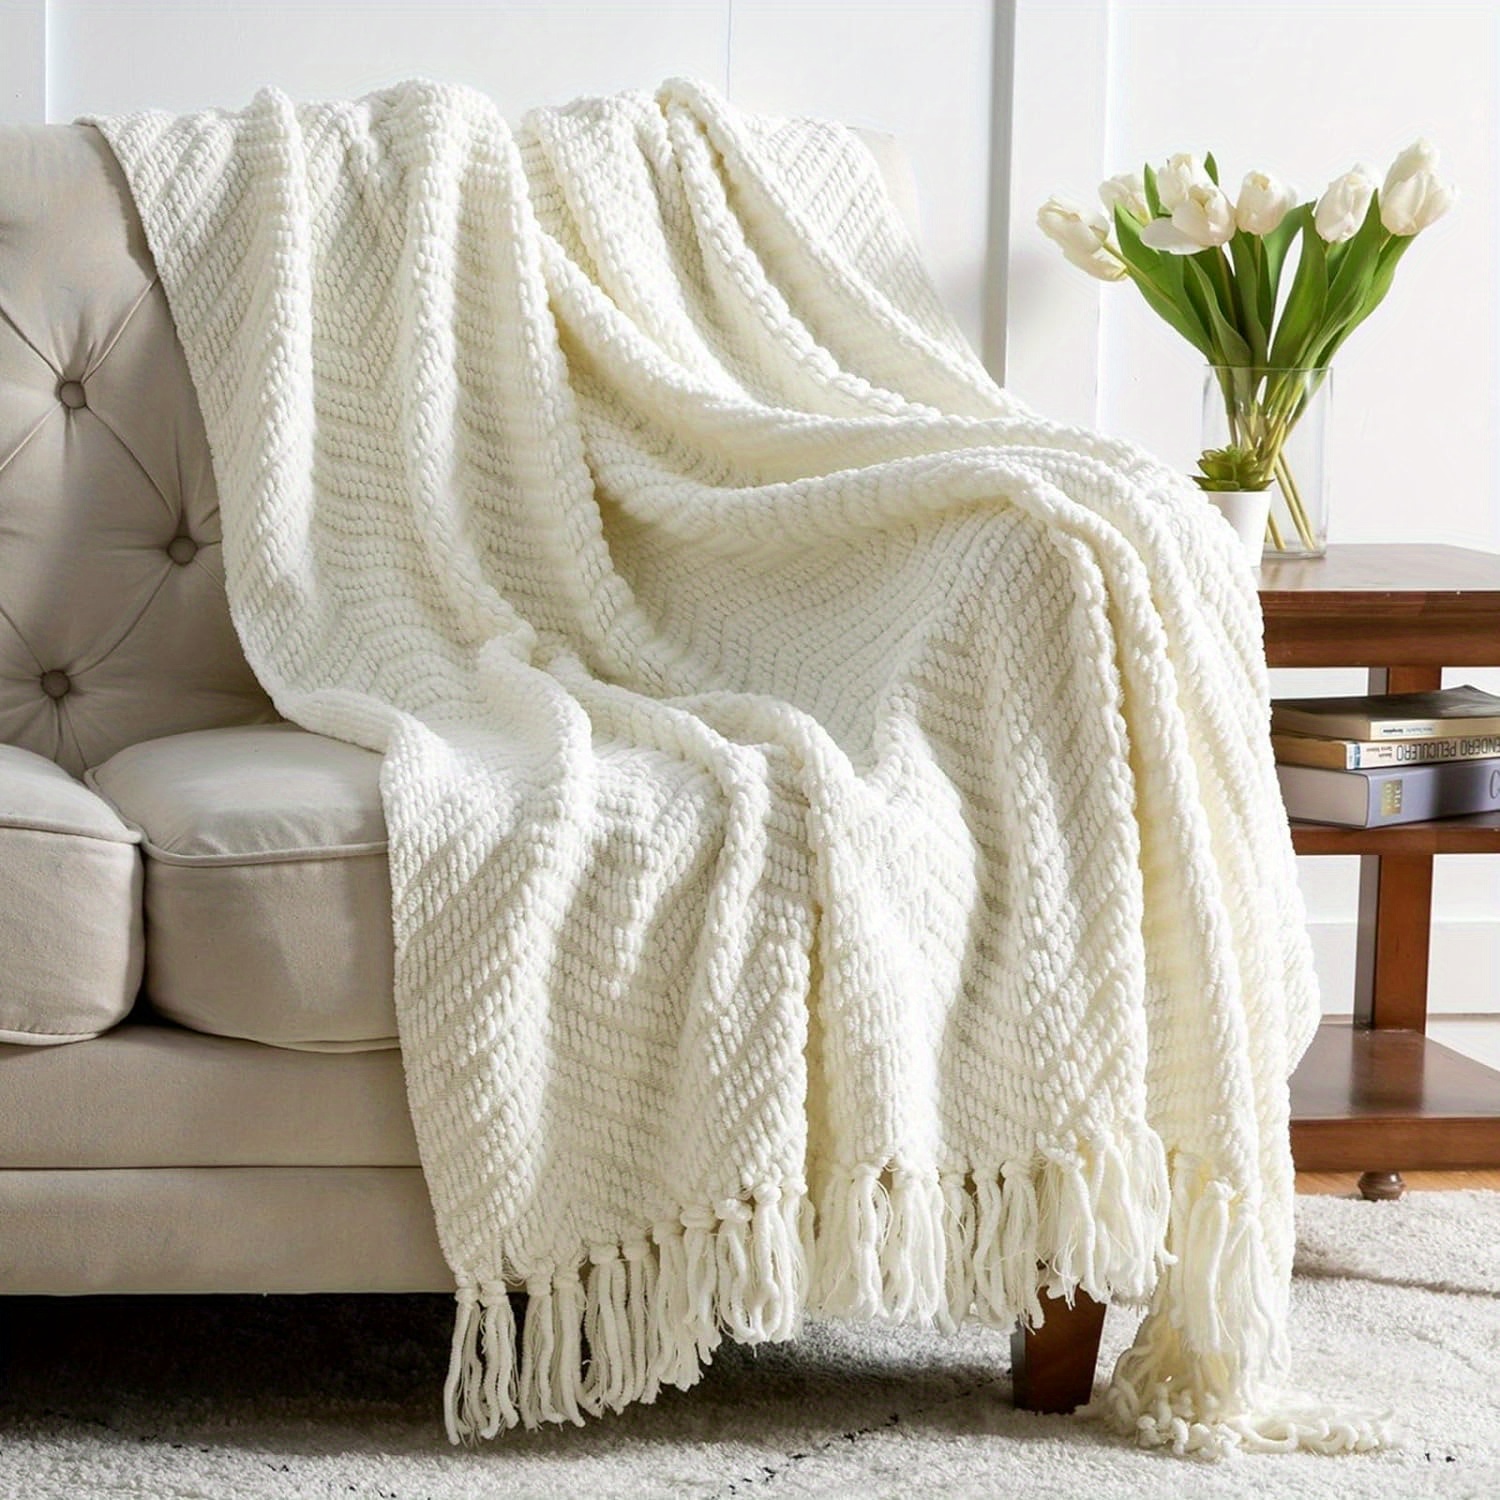 

Bedsure Blankets For Couch, Twin, Throw Textured Knit Woven Blanket, - Super Soft Warm Decorative Blanket With Tassels For Couch, Bed, Sofa And Living Room